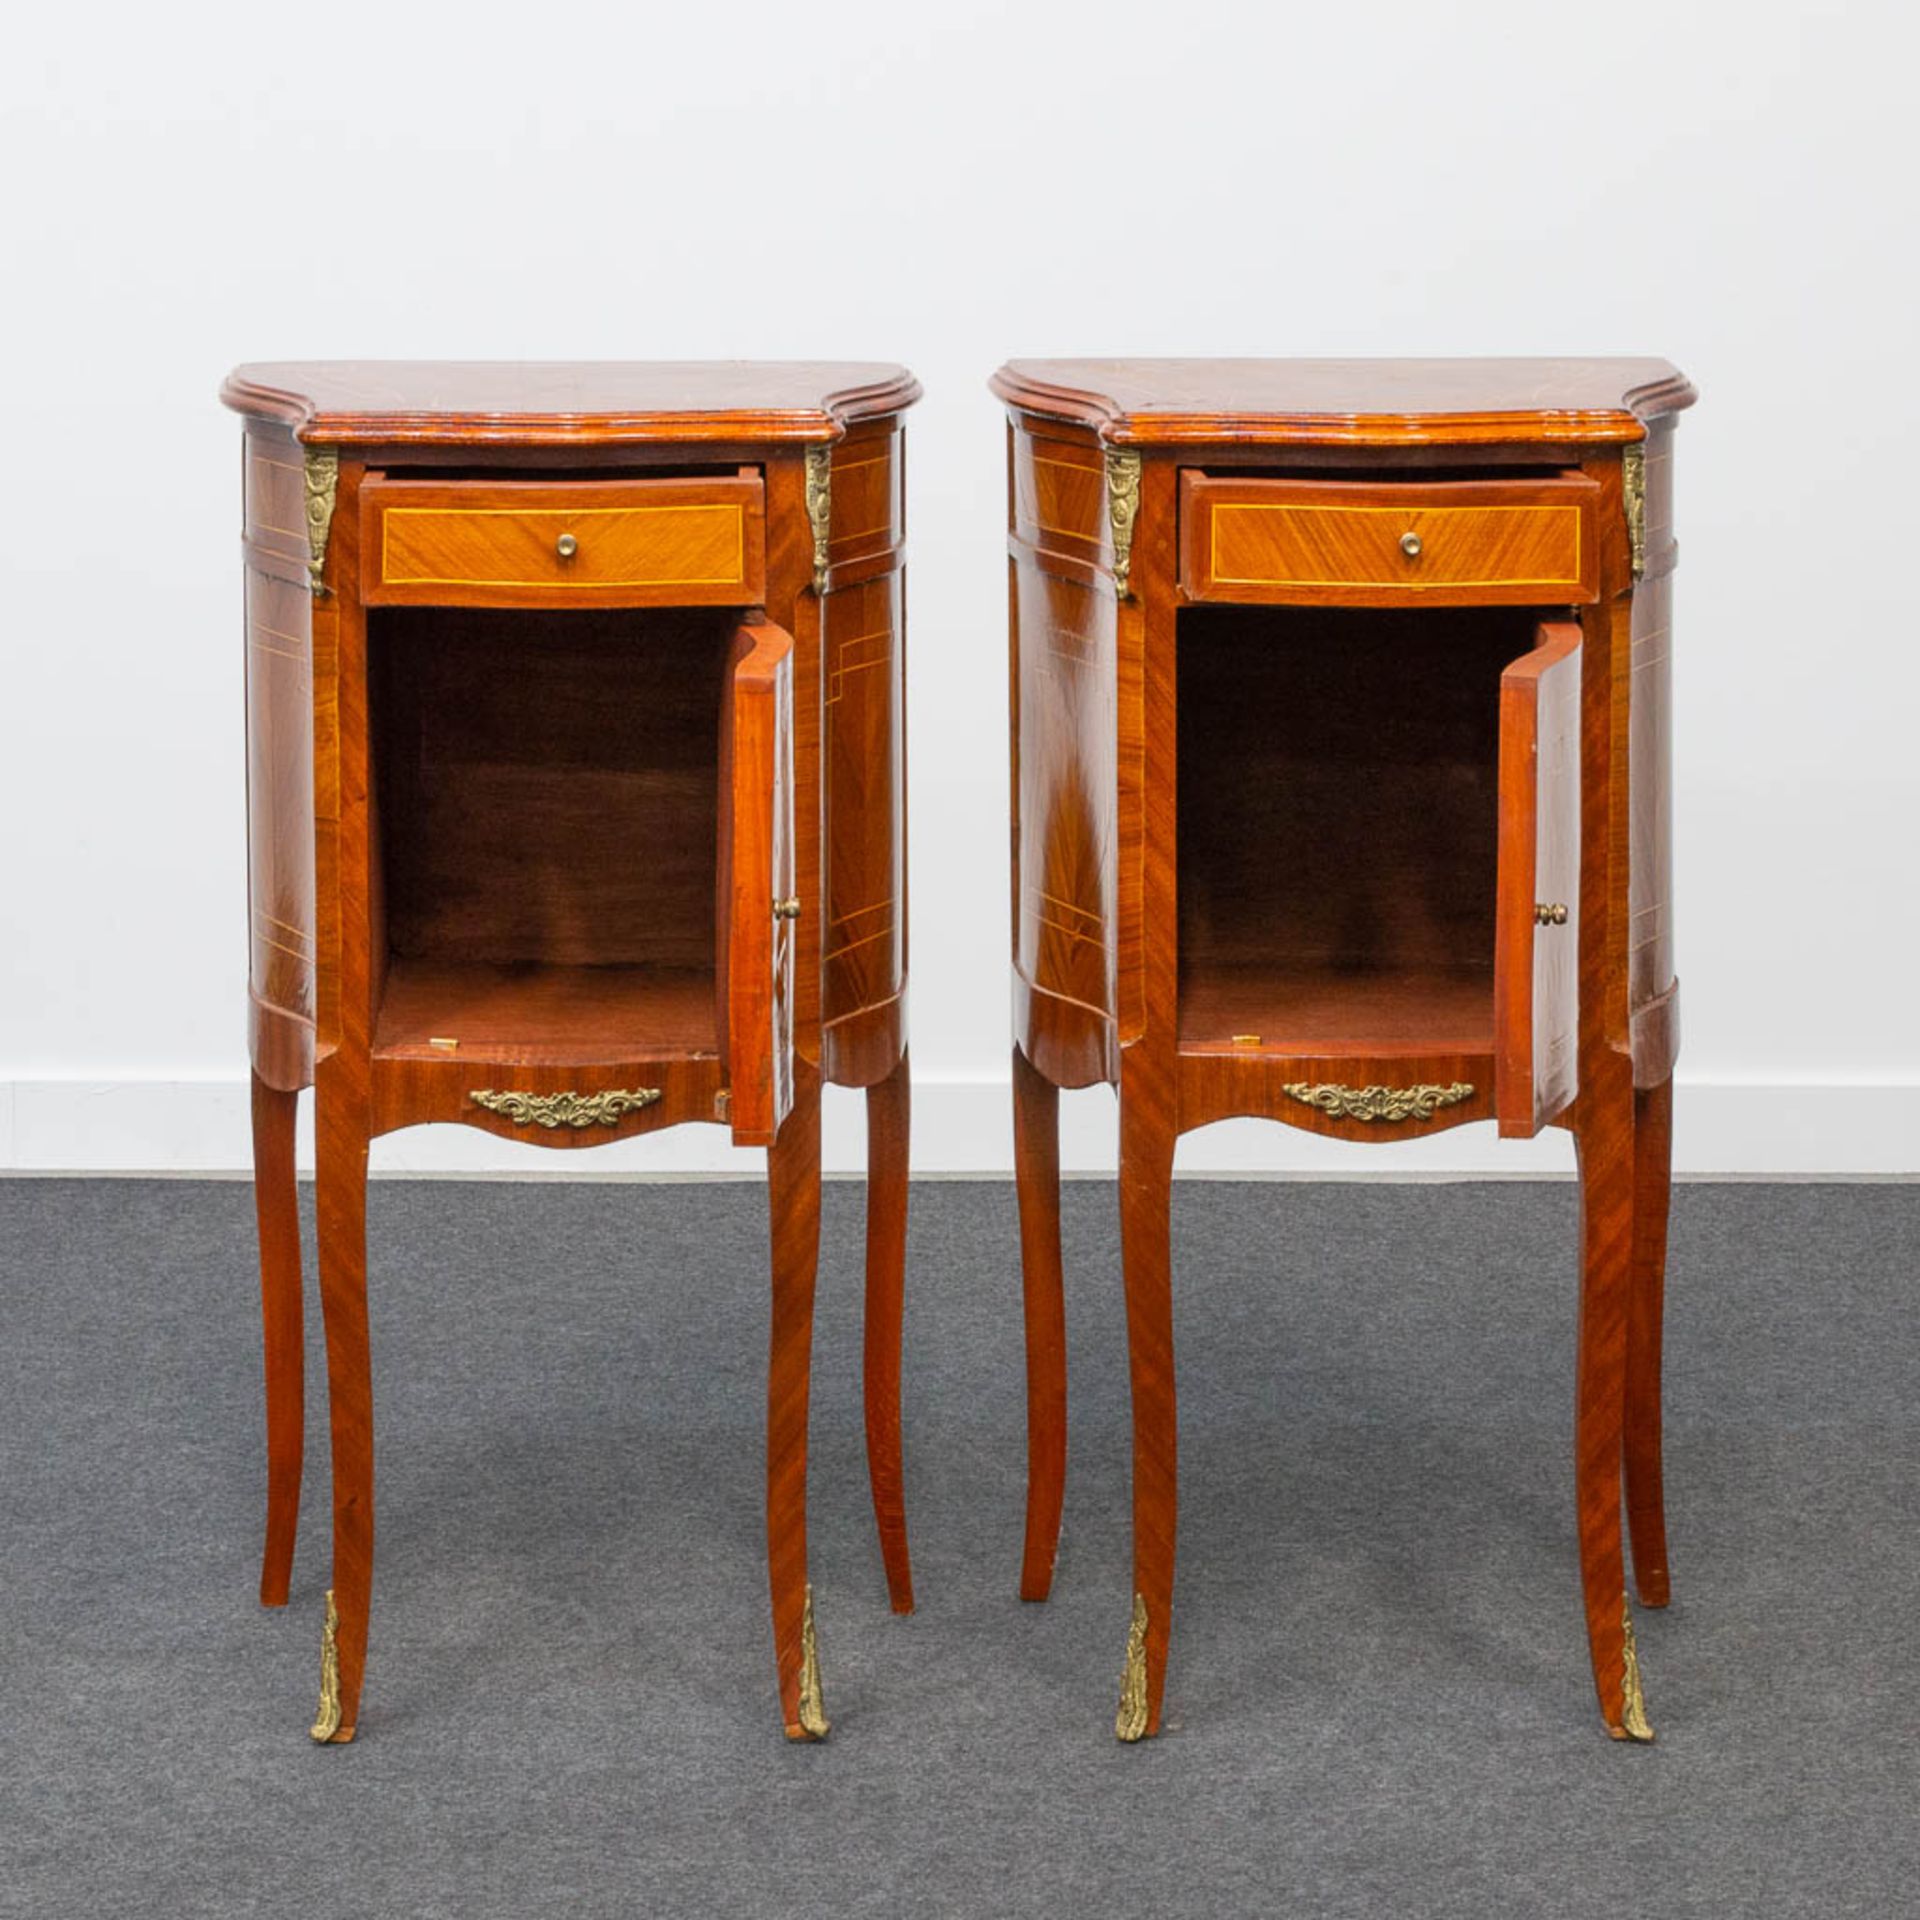 A pair of bronze mounted nightstands, inlaid with marquetry. Second half of the 20th century. - Image 3 of 22